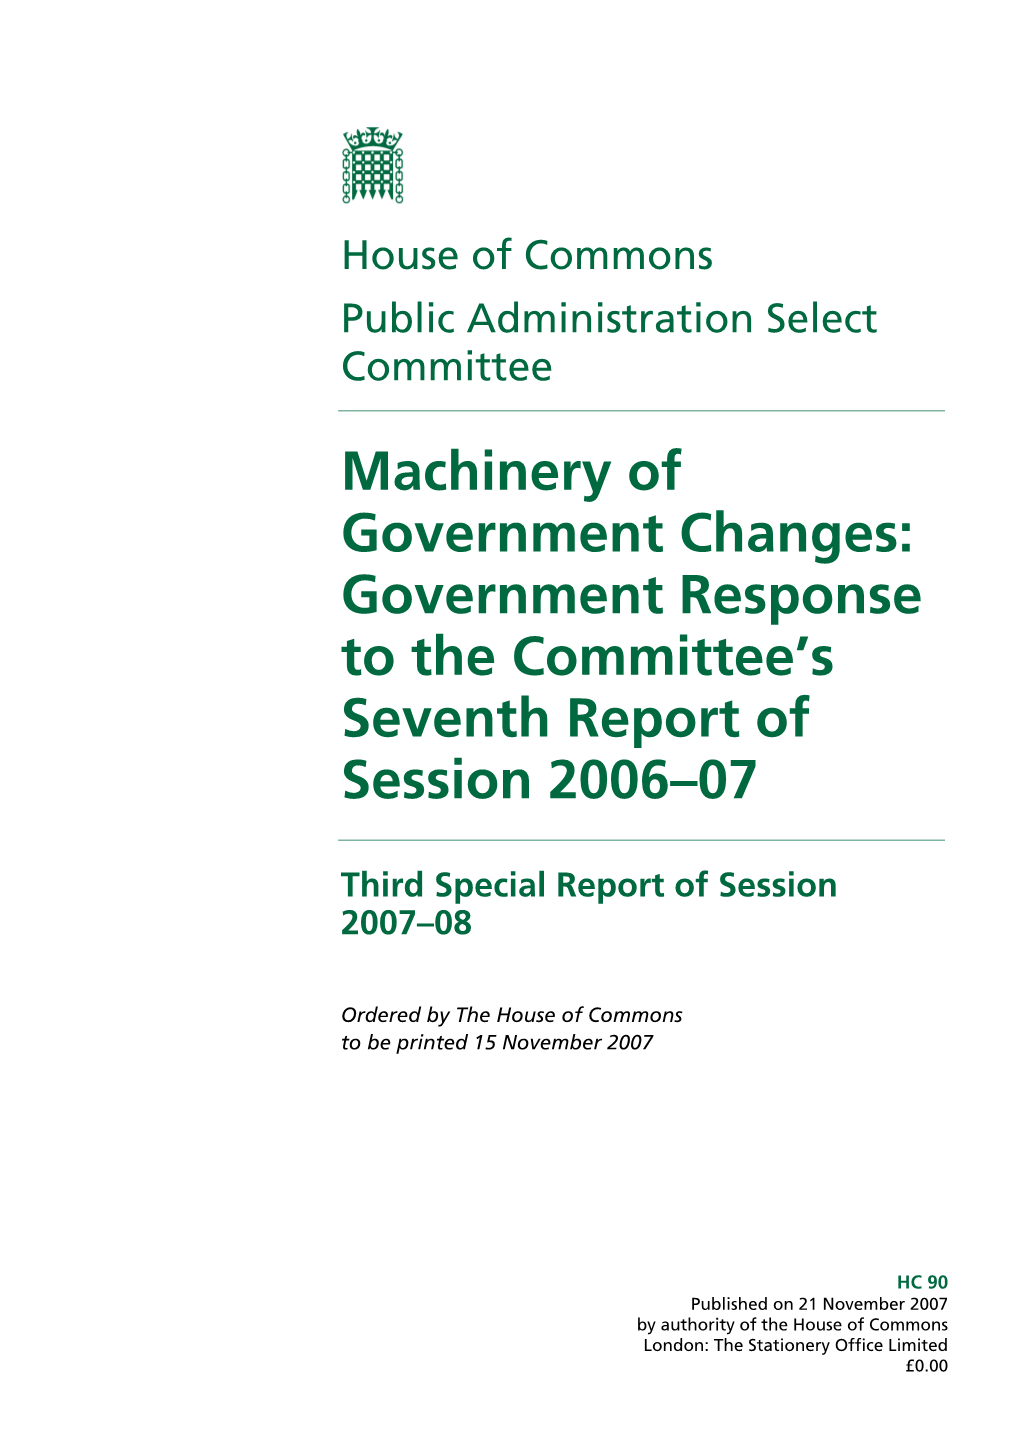 Government Response to the Committee's Seventh Report Of